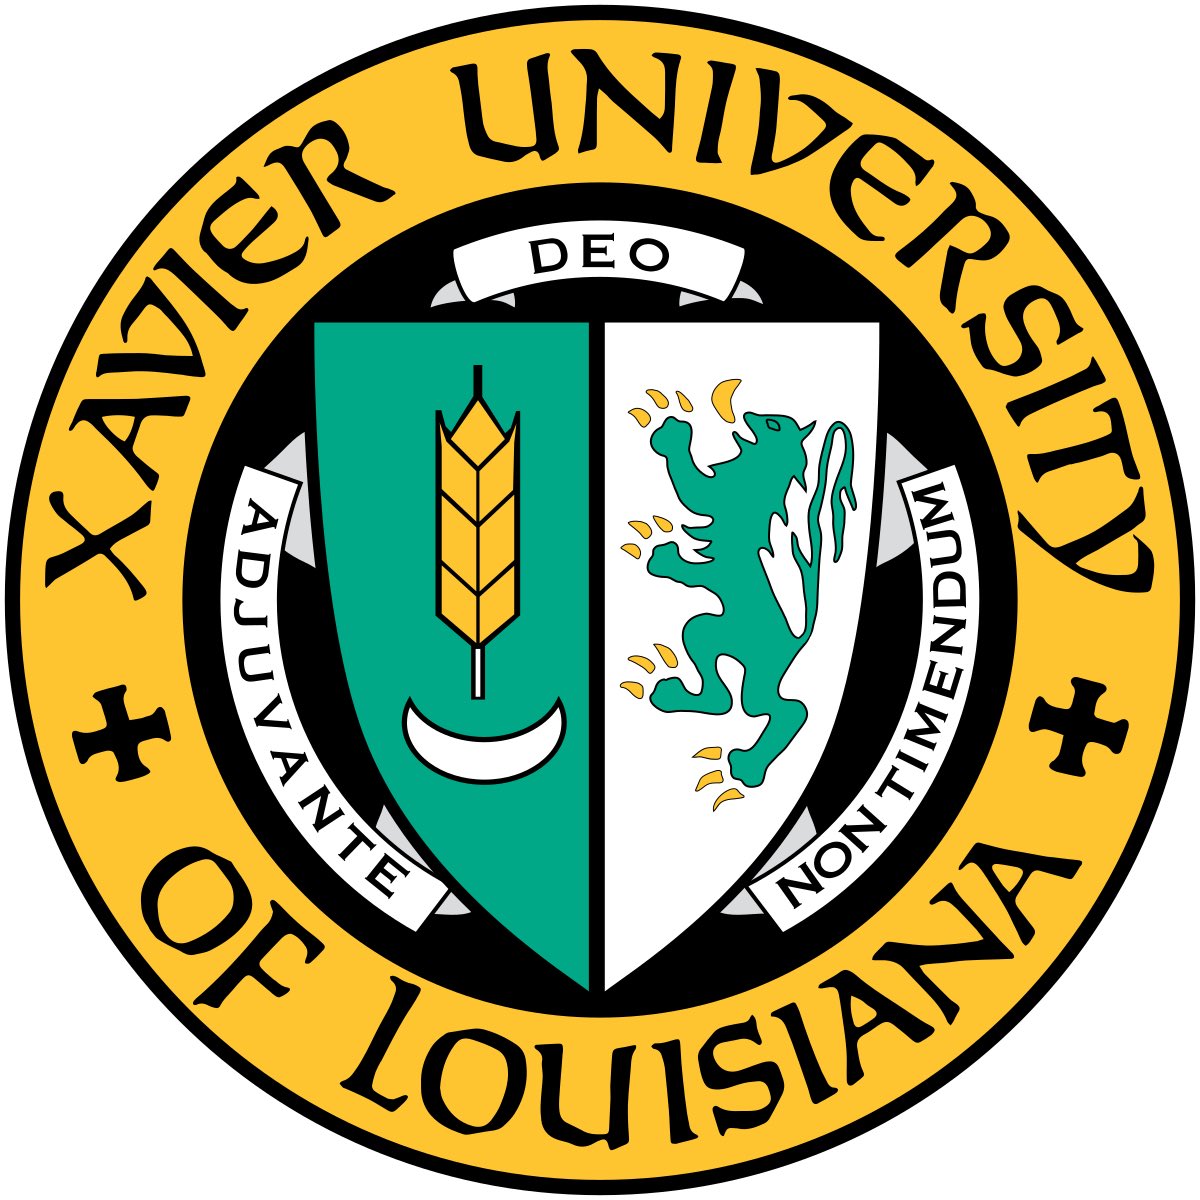 I will be signing my National Letter of Intent to Xavier University of Louisiana, on Wednesday February 7th at 1:20 pm in the Westlake Highschool Gymnasium. All are Welcome!! #GoldRush @KelceyWhite5 @XulaBaseball @WestlakeSports1